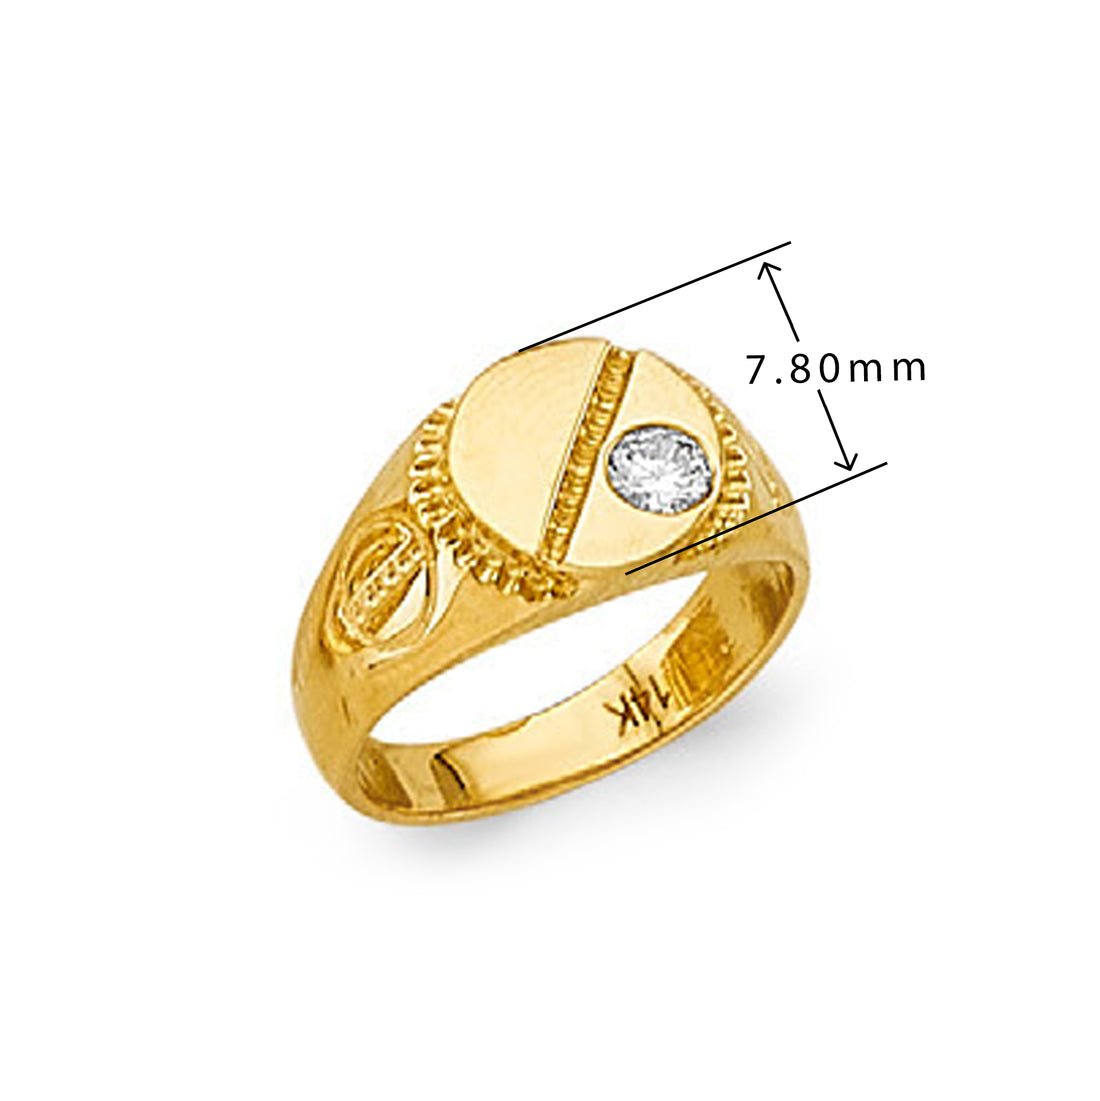 CZ Signature Signet Ring in Solid Gold with Measurement